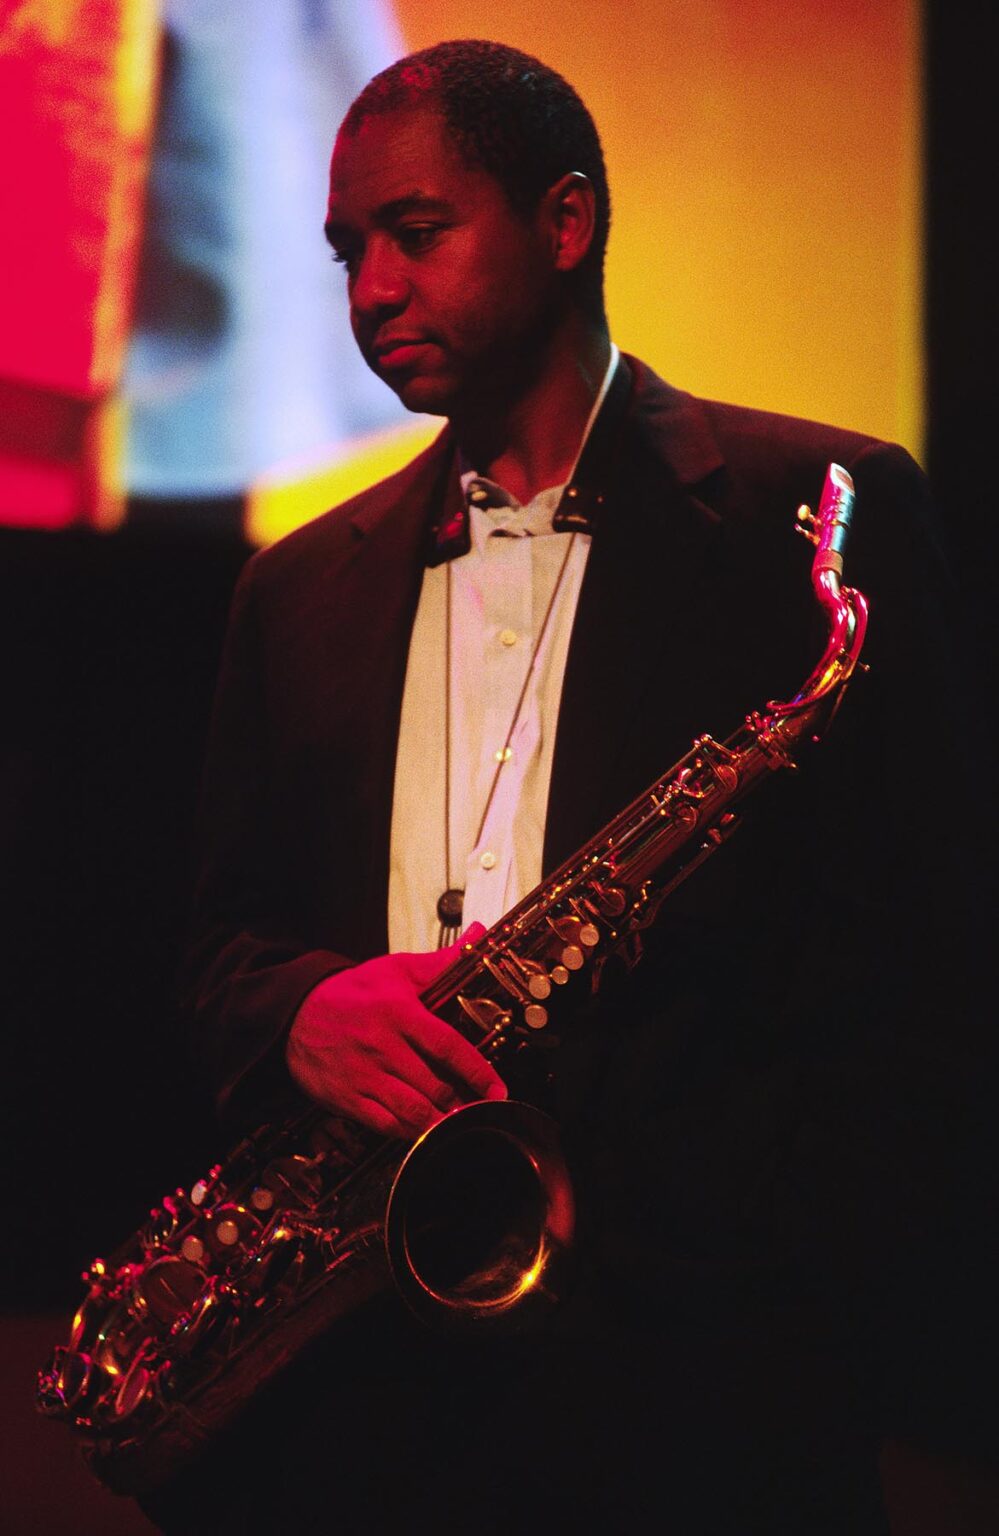 BRANFORD MARSALIS performs with the McCoy Tyner Trio at the MONTEREY JAZZ FESTIVAL - CALIFORNIA